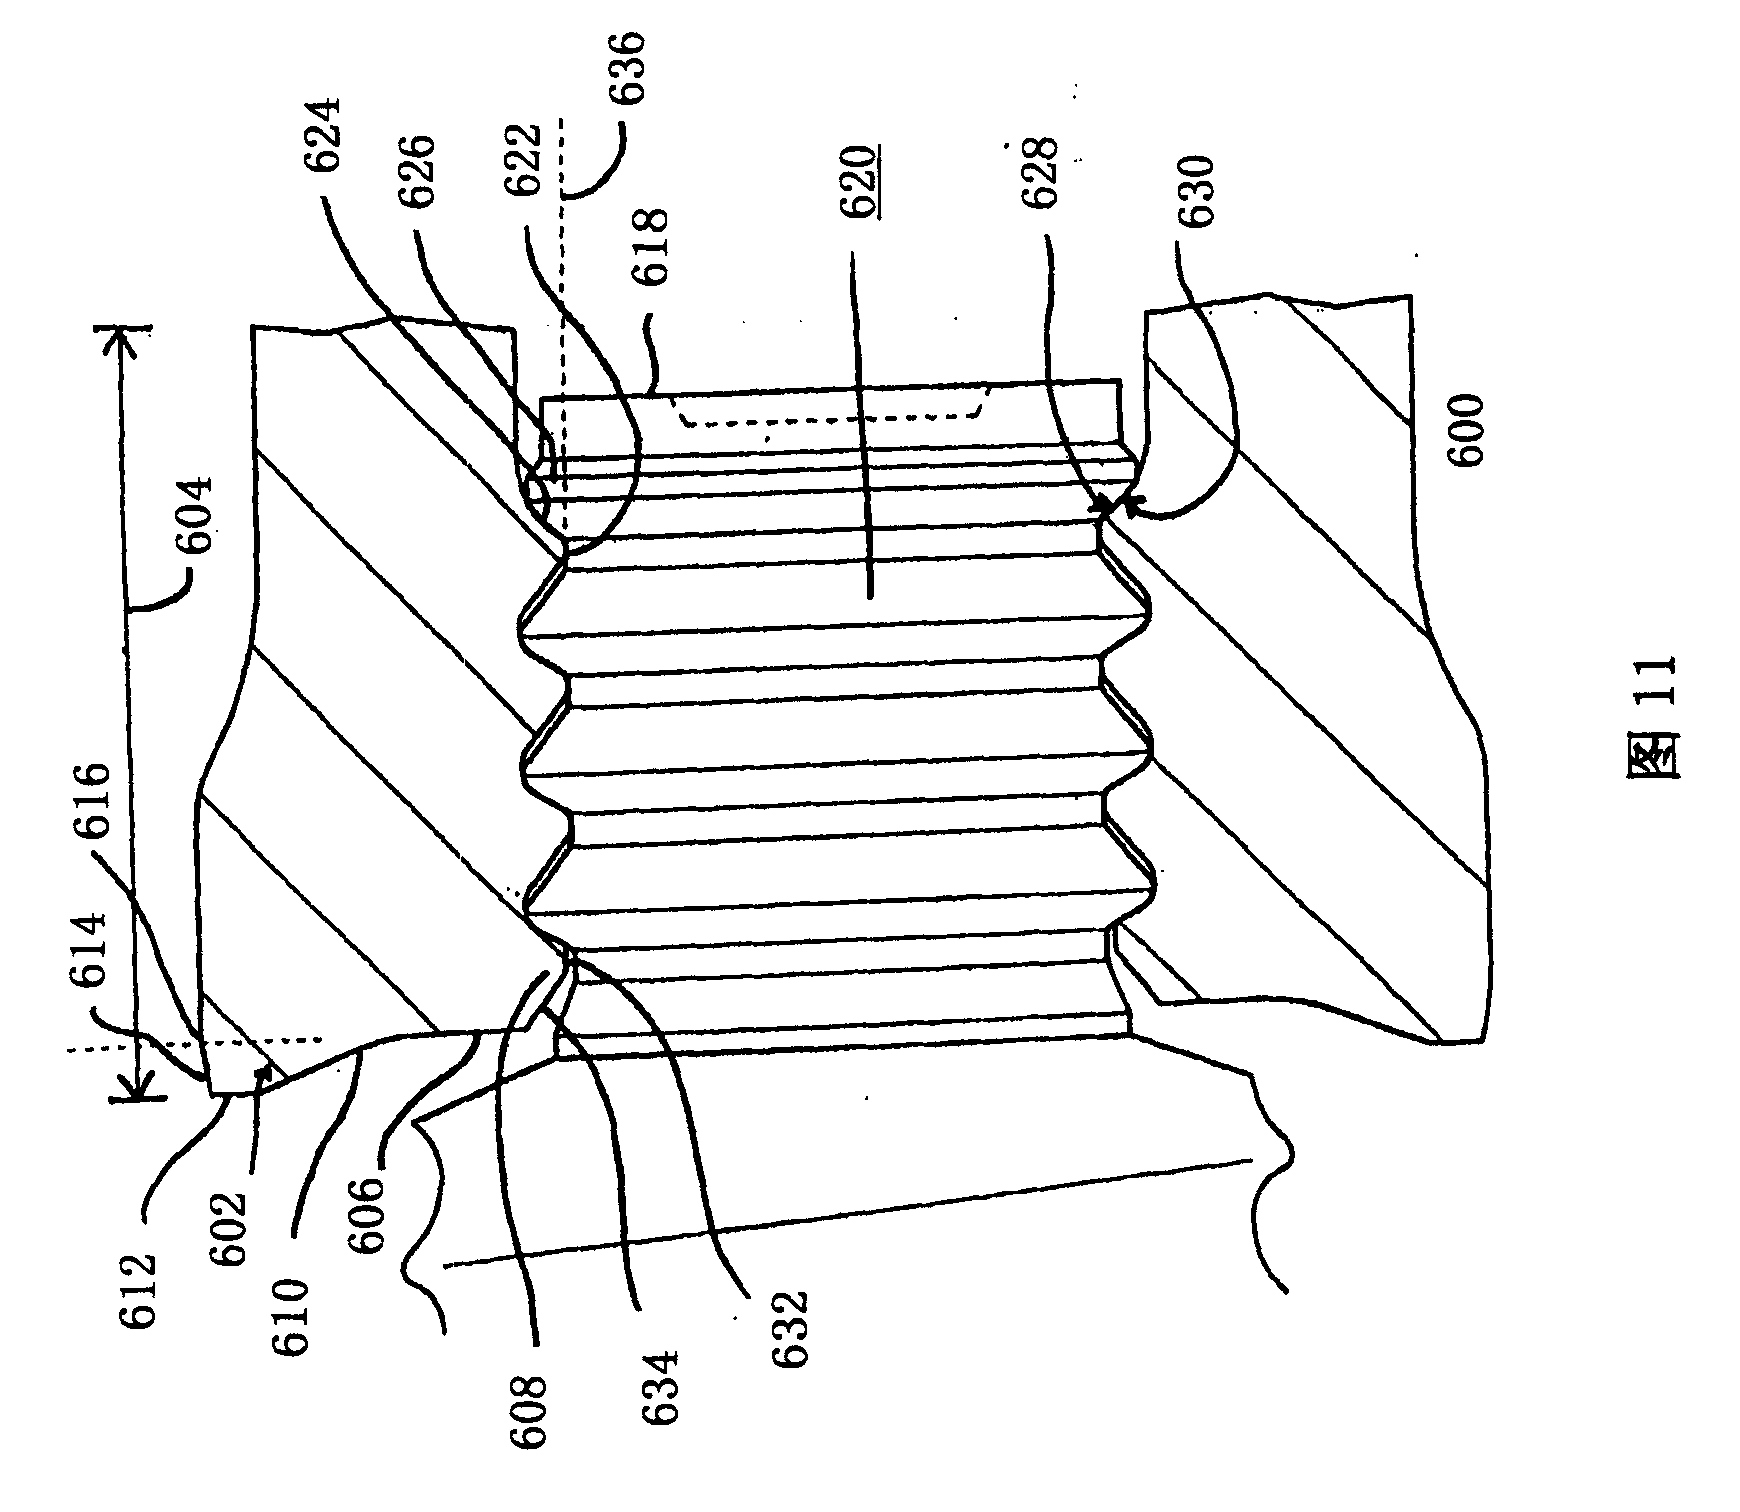 Low molding pressure load fastening system and method